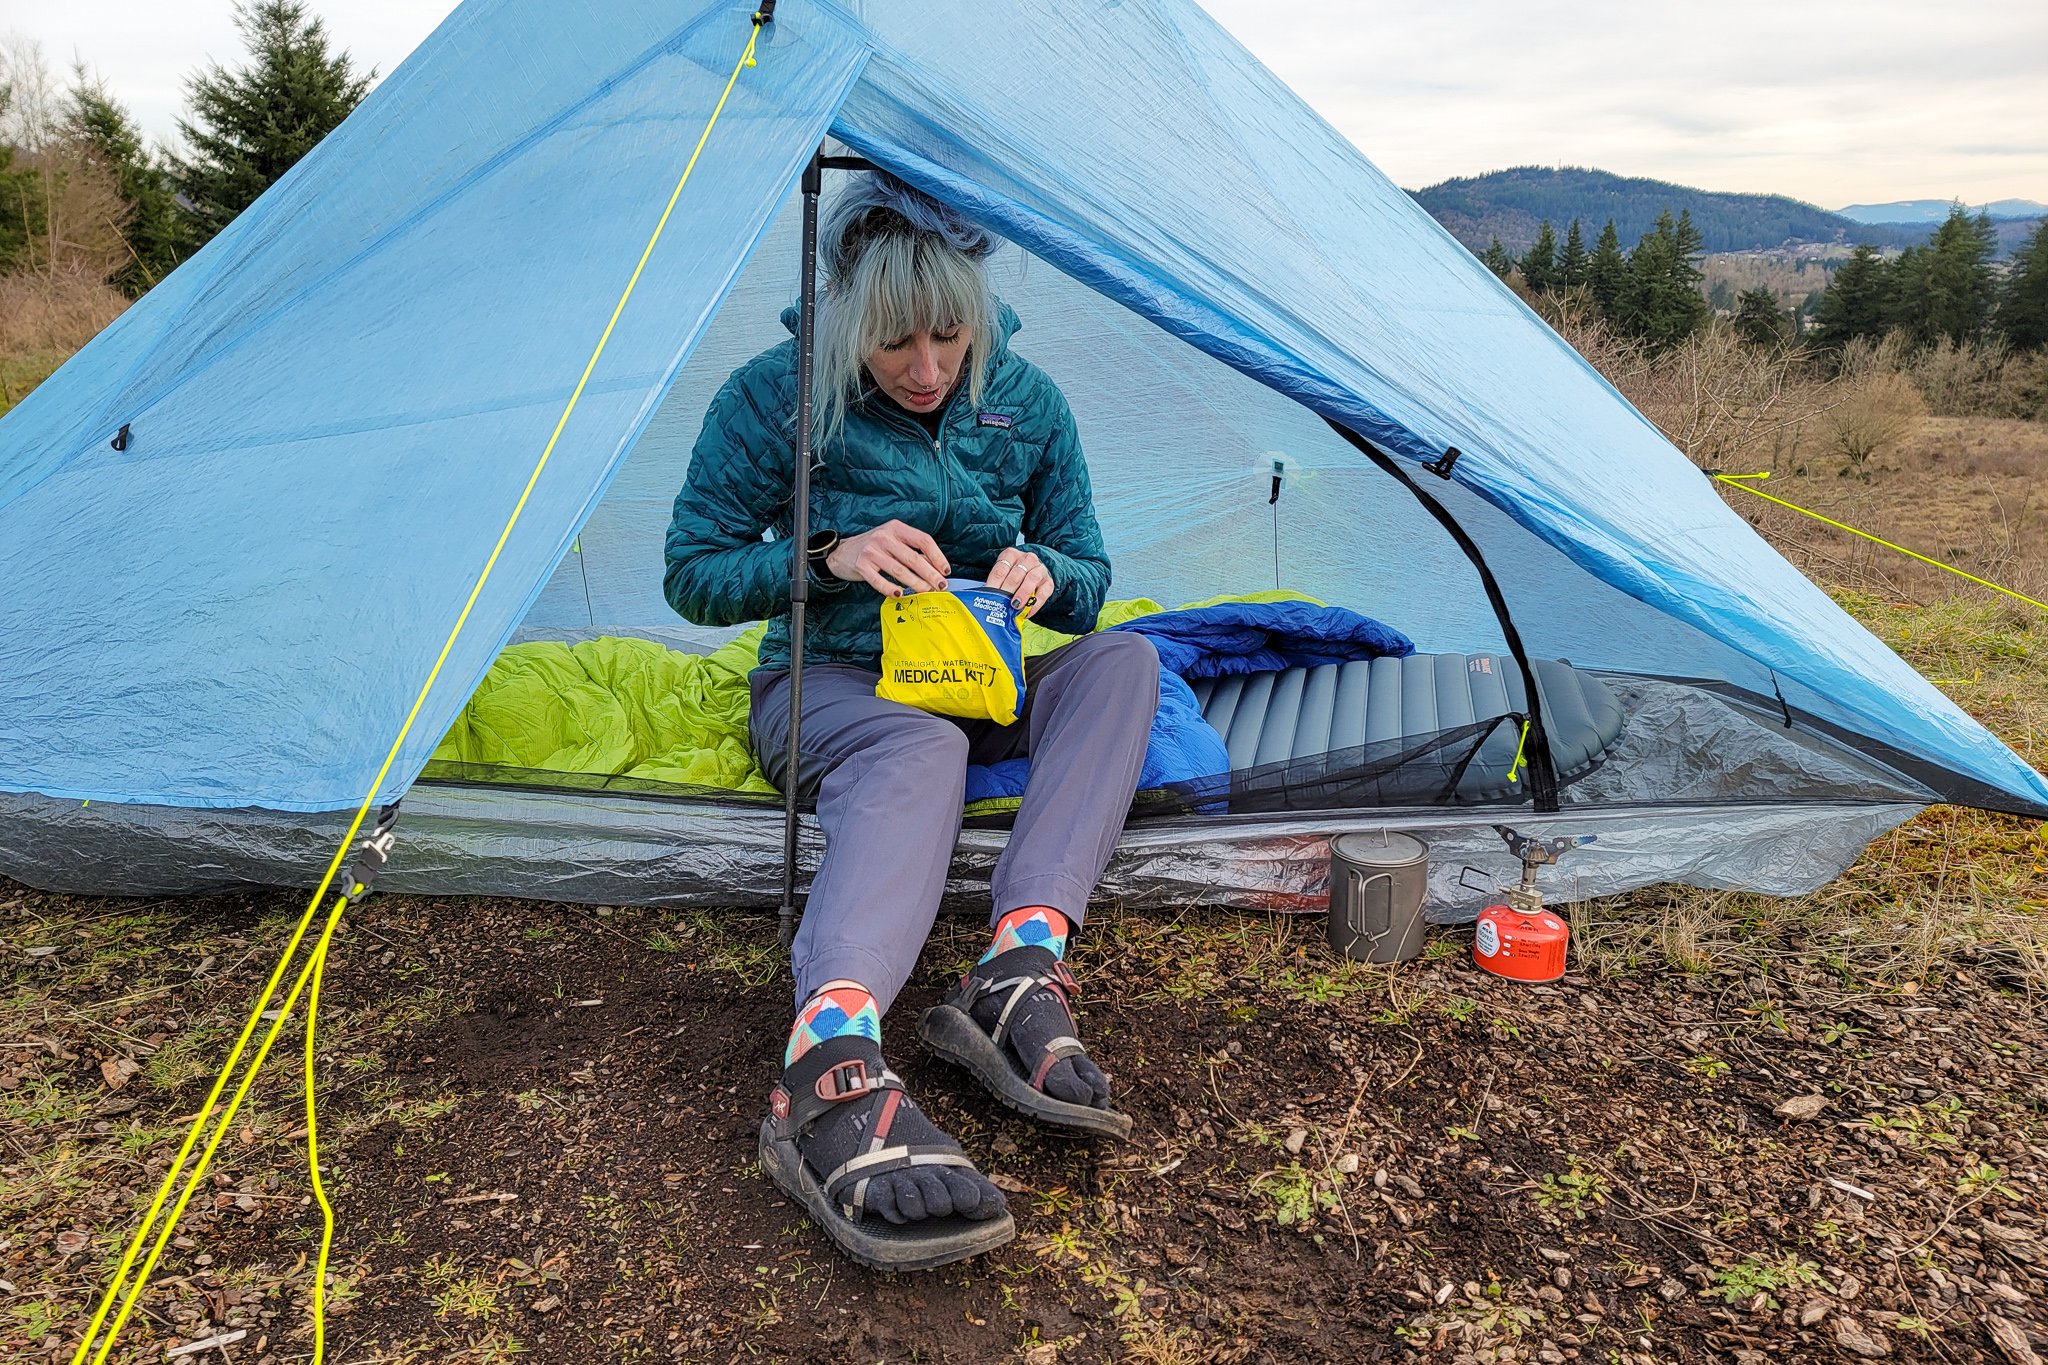 A hiker looking through the AMK Ultralight/Watertight .7 First Aid Kit in a backpacking tent